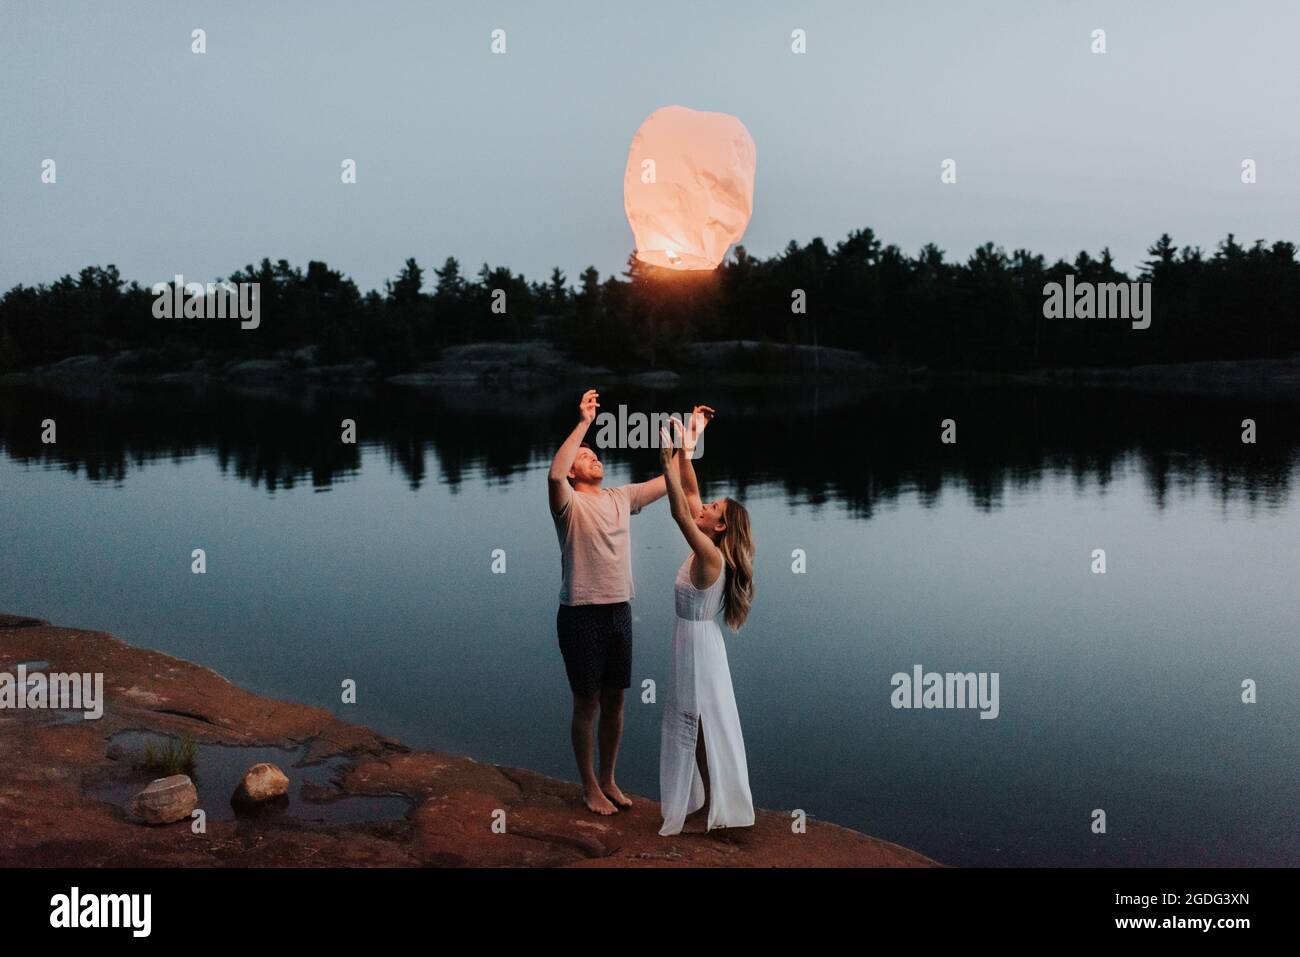 Couple releasing sky lanterns by lake, Algonquin Park, Canada Stock Photo